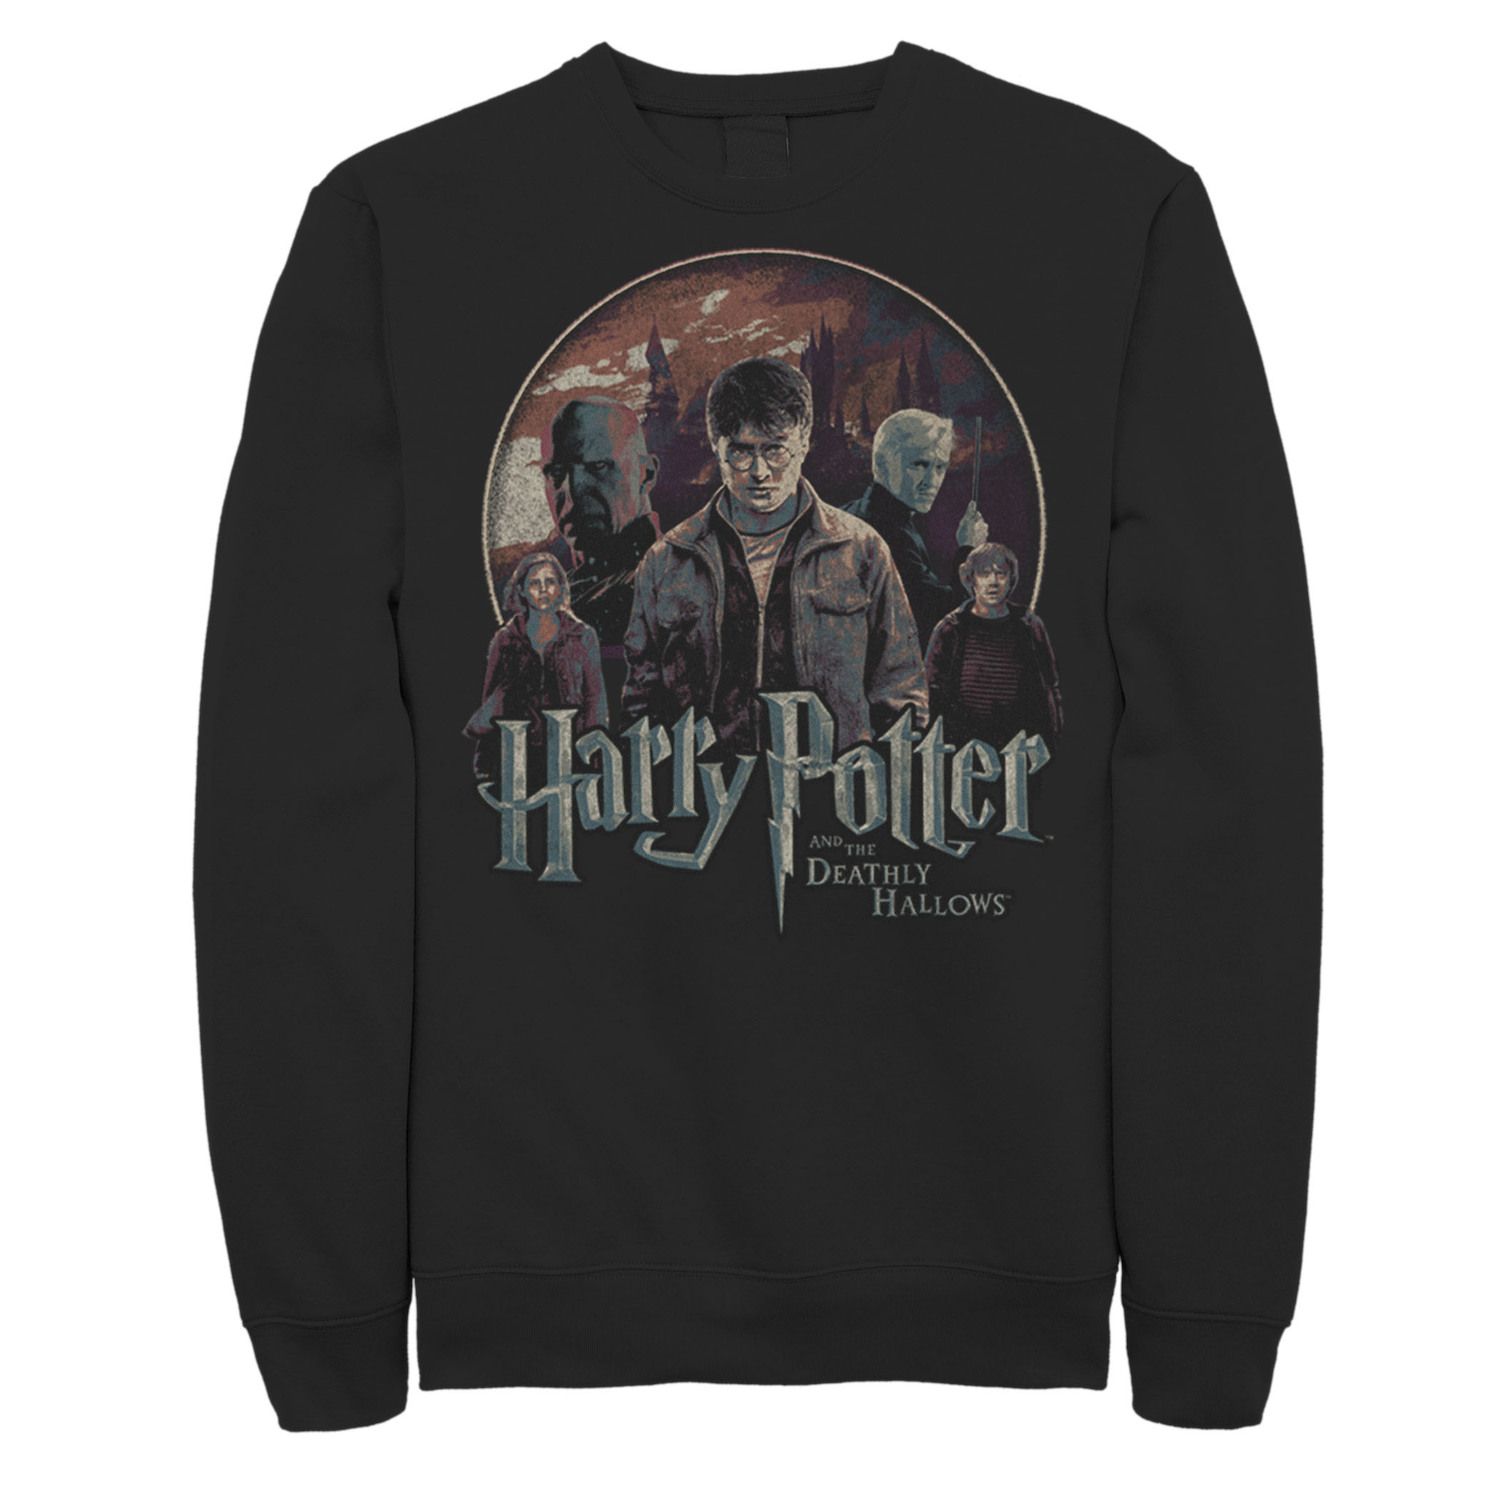 Image for Harry Potter Men's And The Deathly Hallows Group Shot Sweatshirt at Kohl's.